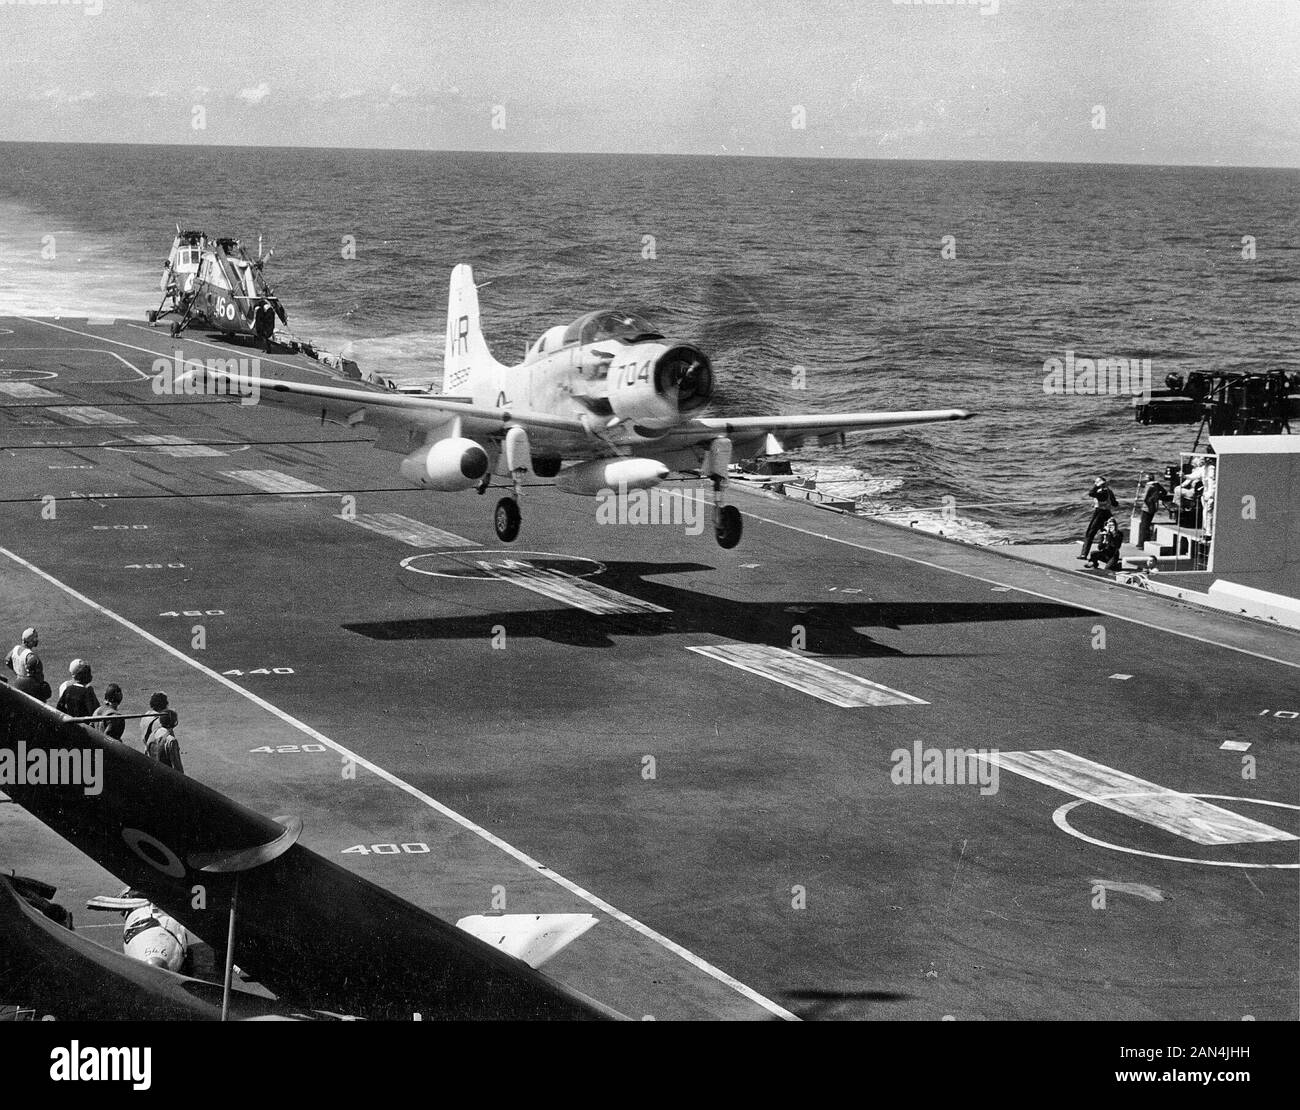 A U.S. Navy Douglas EA-1F Skyraider of electronic warfare squadron VAW-13 Zappers making a touch-and-go landing on the British aircraft carrier HMS Victorious (R38) off Cubi Point, Philippines, in late 1963 during a five-day exercise of U.S., British and Australian carriers. Note the two Westland Wessex helicopters parked on the fantail and the folded wings of a DeHavilland Sea Vixen fighter in the foreground. 1963 Stock Photo